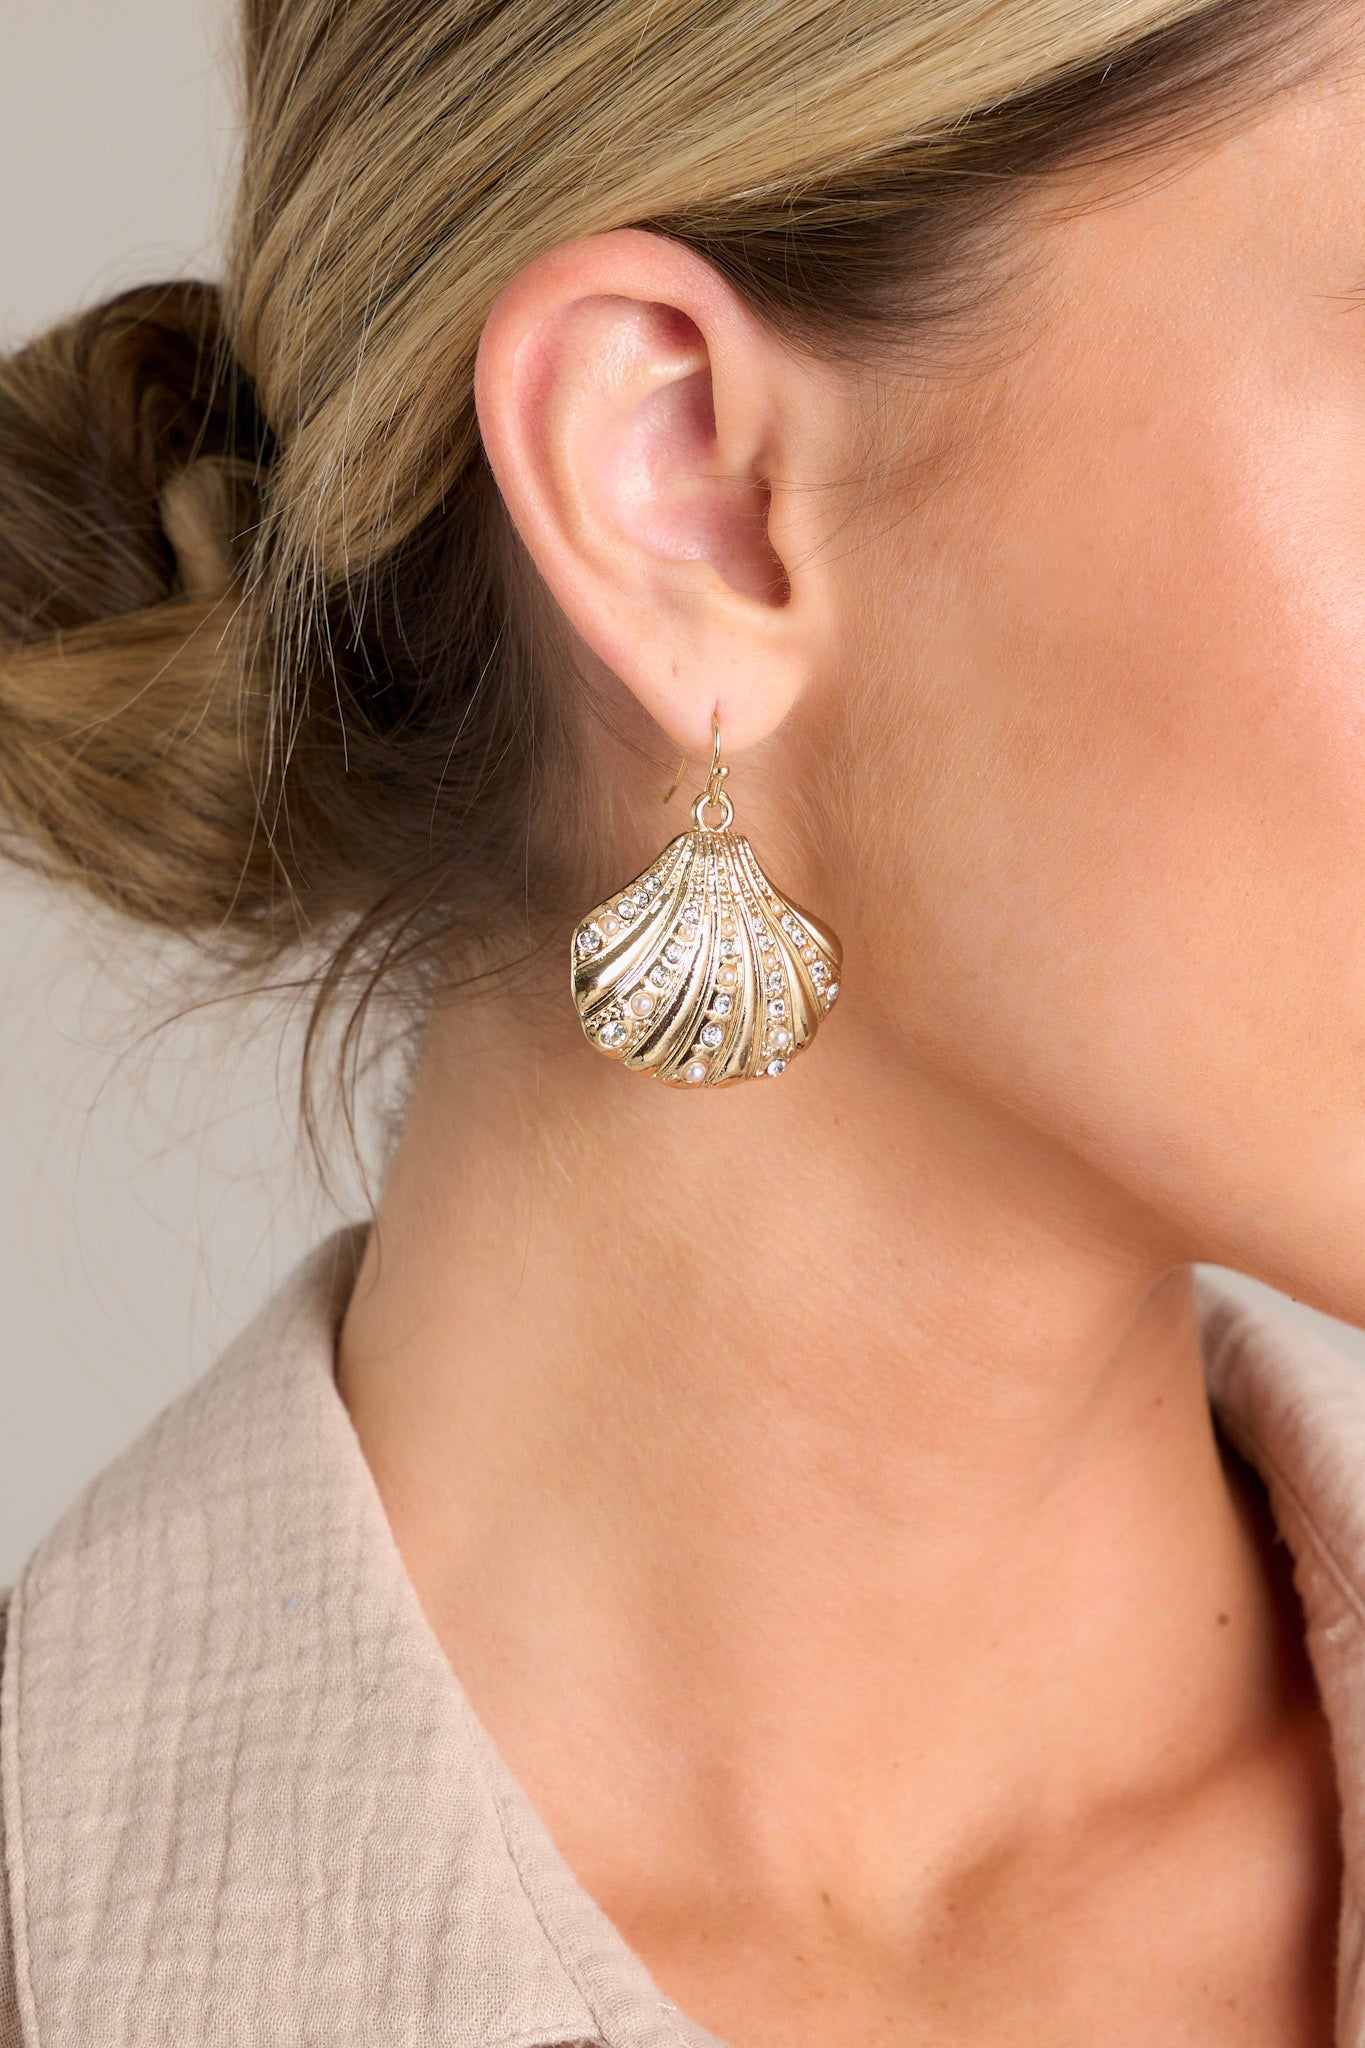 Close-up of these gold earrings that feature a gold seashell pendant adorned with rhinestones and faux pearls.